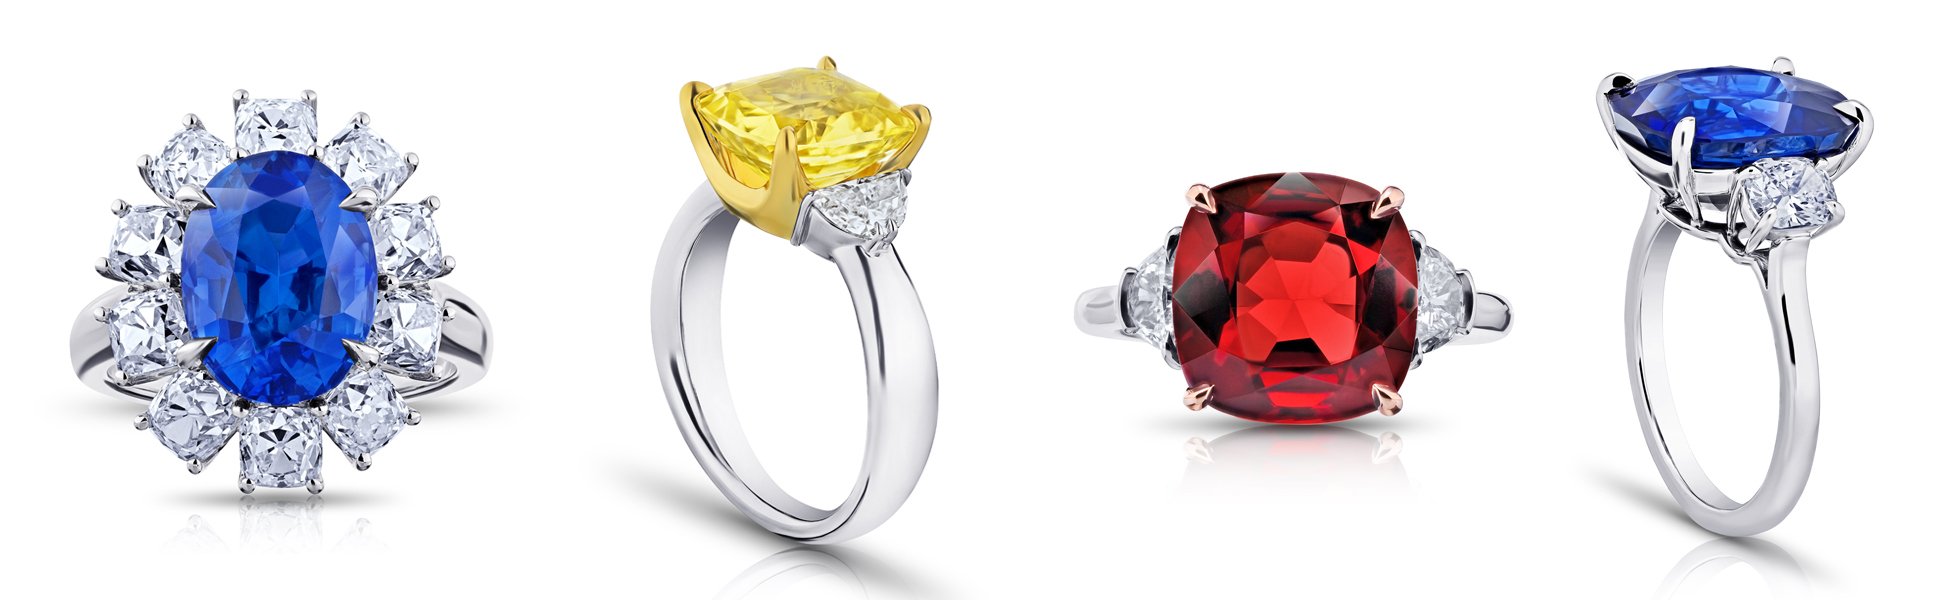 SNEAK PEEK :: High Jewelry, An Exploration of Natural Colored Diamonds and Fine Gemstone Designs